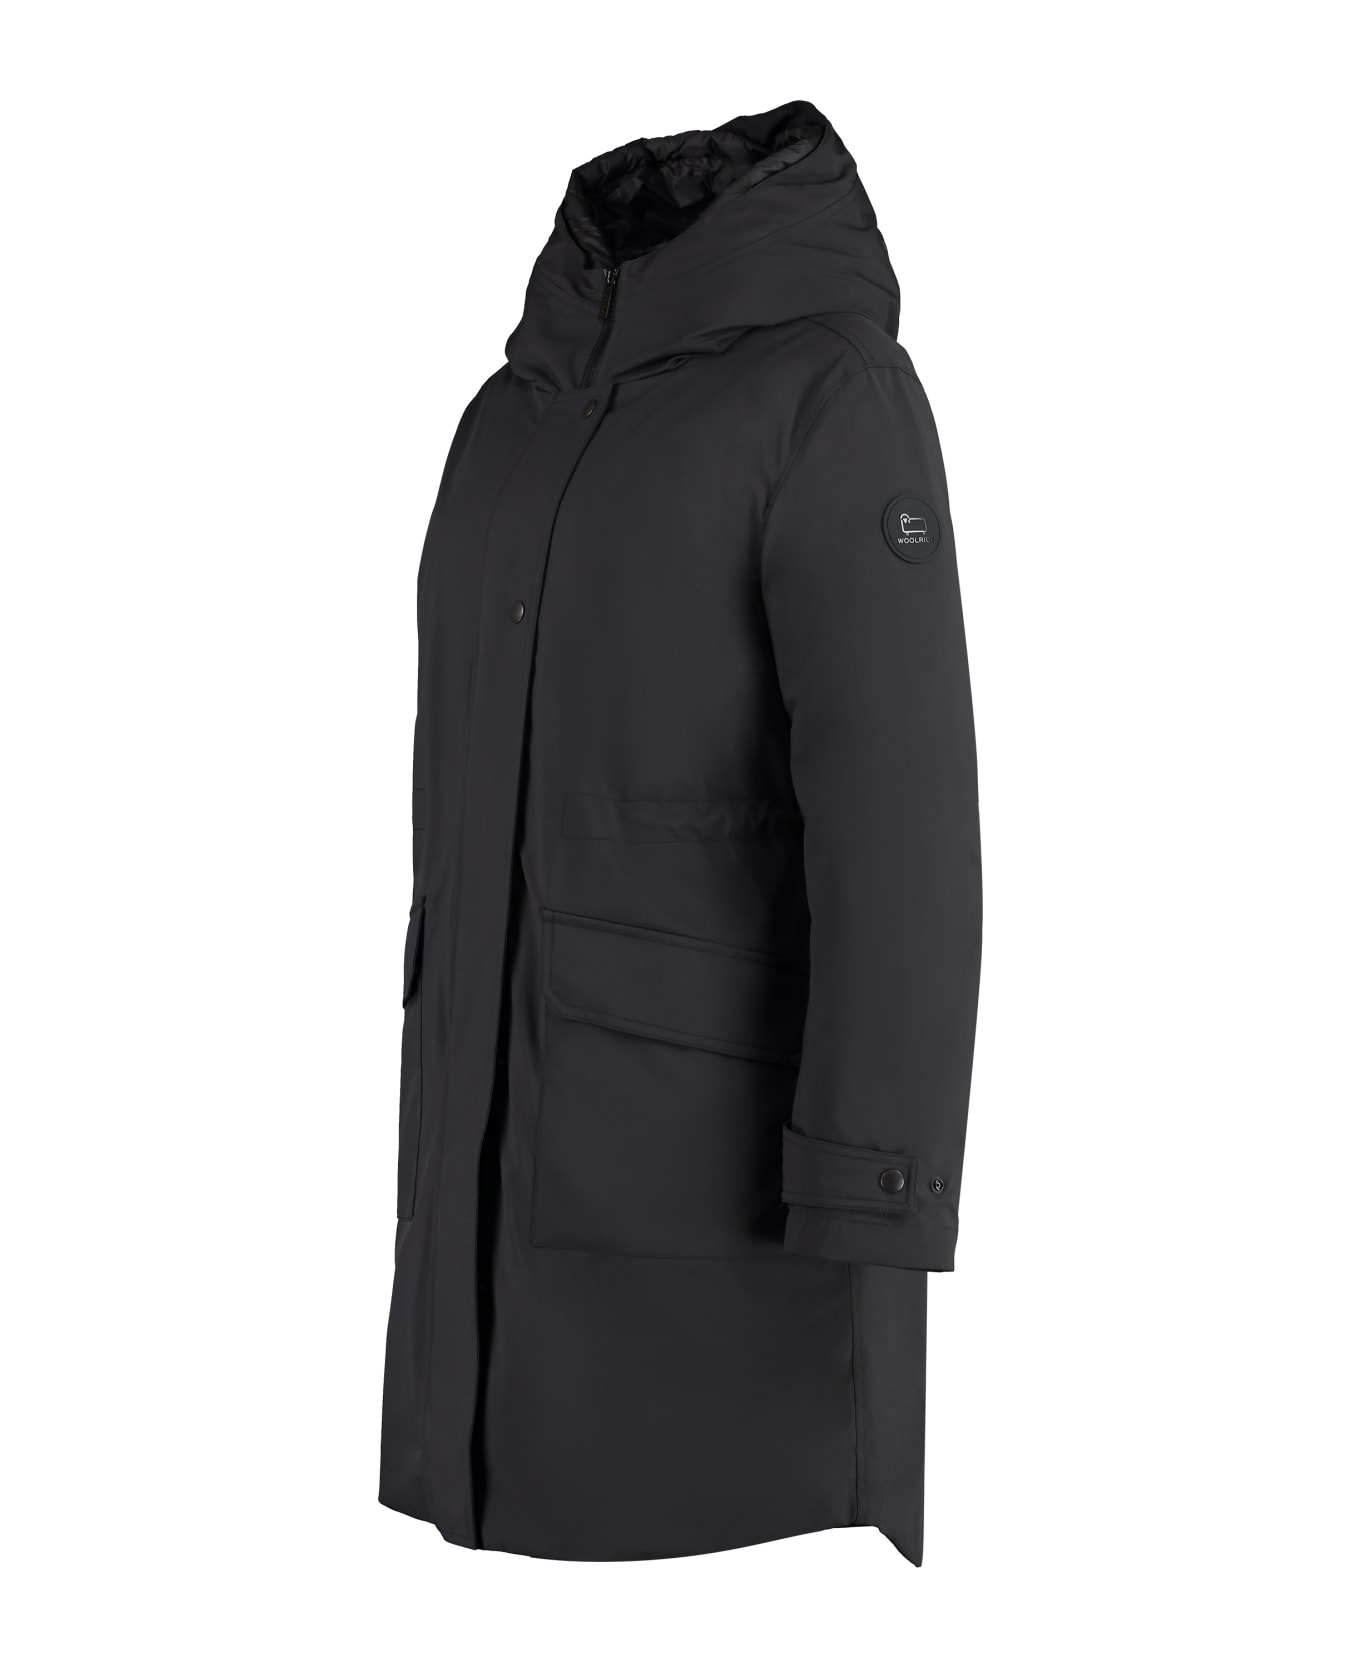 Woolrich Military Technical Fabric Parka With Internal Removable Down Jacket - black コート